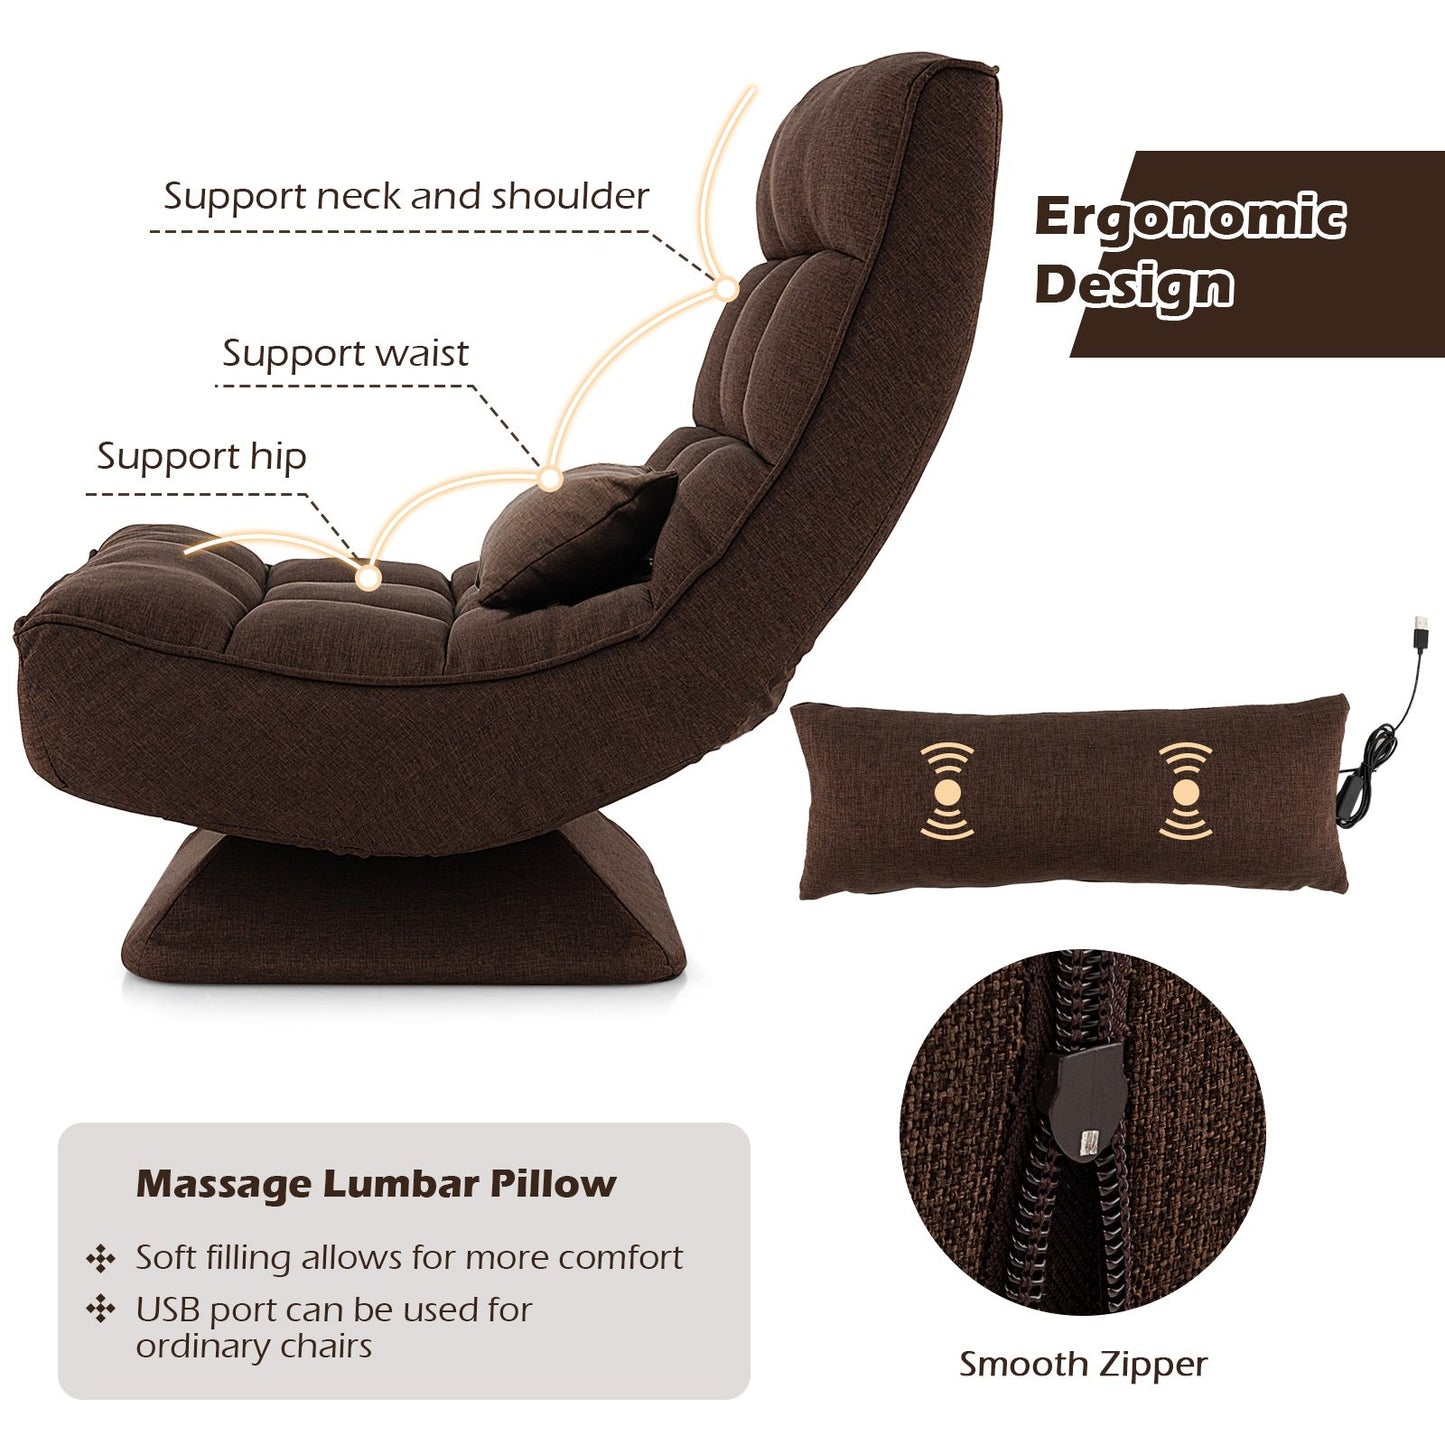 5-Level Adjustable 360° Swivel Floor Chair with Massage Pillow, Brown